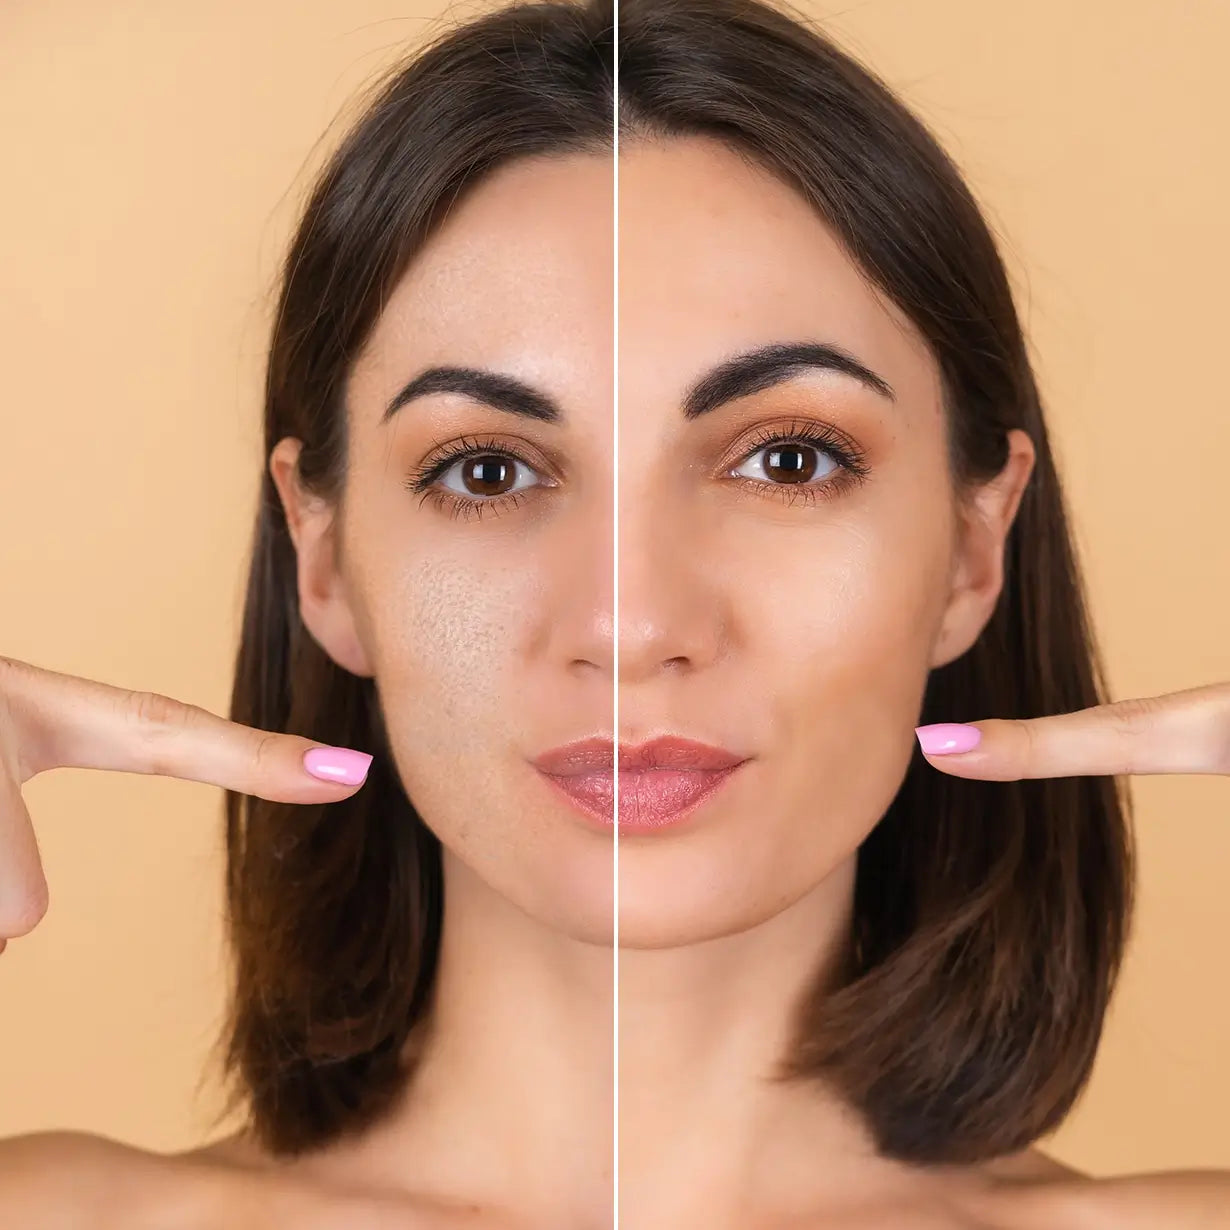 How to Minimize Pores on Your Face Through Niacinamide